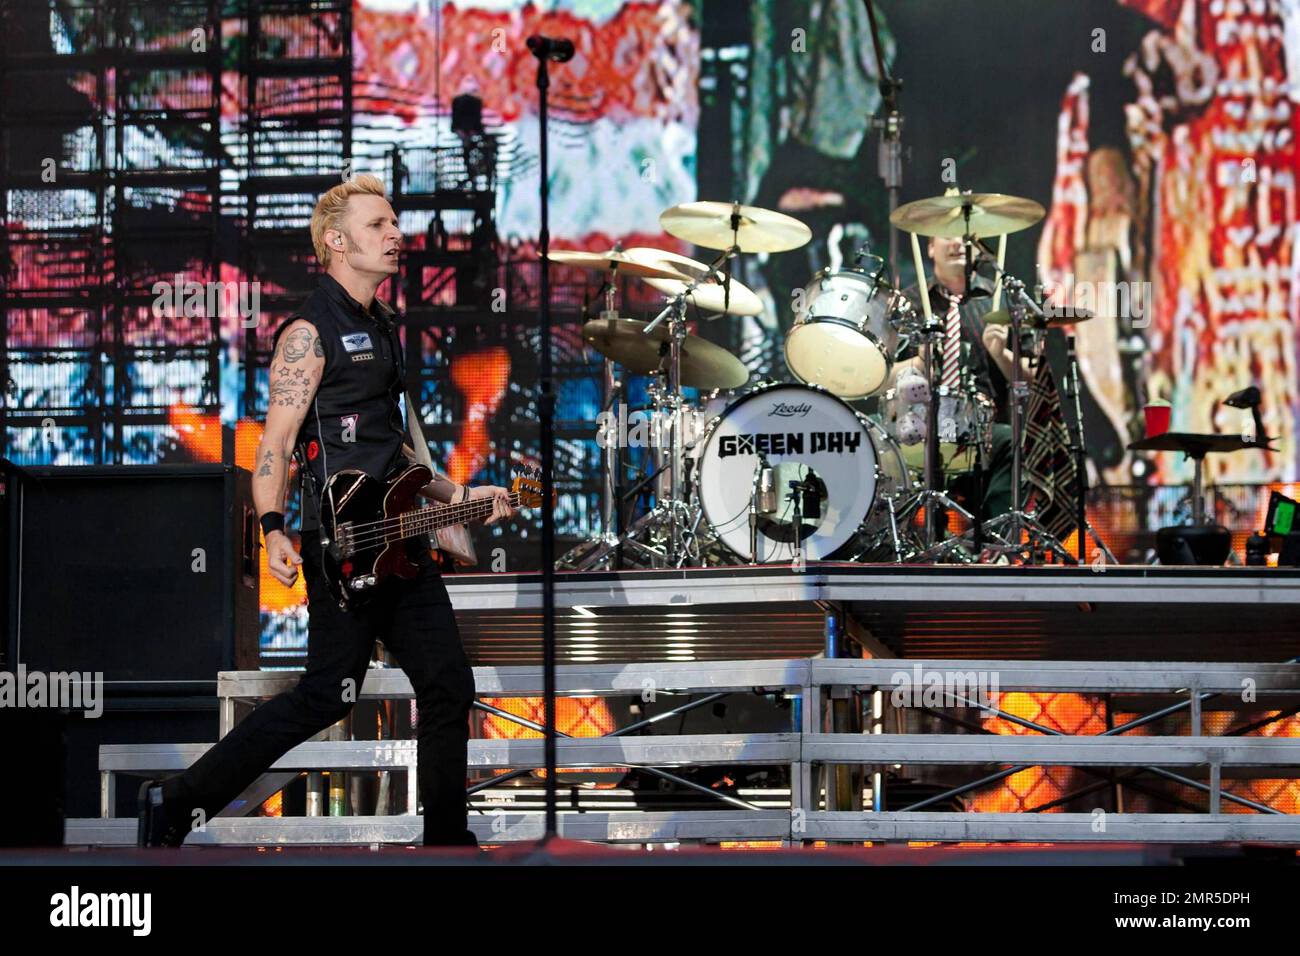 Mike Dirnt and drummer Tr Cool of the punk rock band Green Day perform live at Wembley Stadium. The group, who formed in 1987, played the 90000 capacity stadium with Joan Jett and Frank Turner as the opening act.  The Wembley show is just one of many that the trio will play as part of their world summer tour, which will see them perform in Europe, North and South America.  Green Day has sold more than 50 million albums worldwide and have recently become the subject of the successful video game Rock Band. London, UK. 06/19/10. . Stock Photo